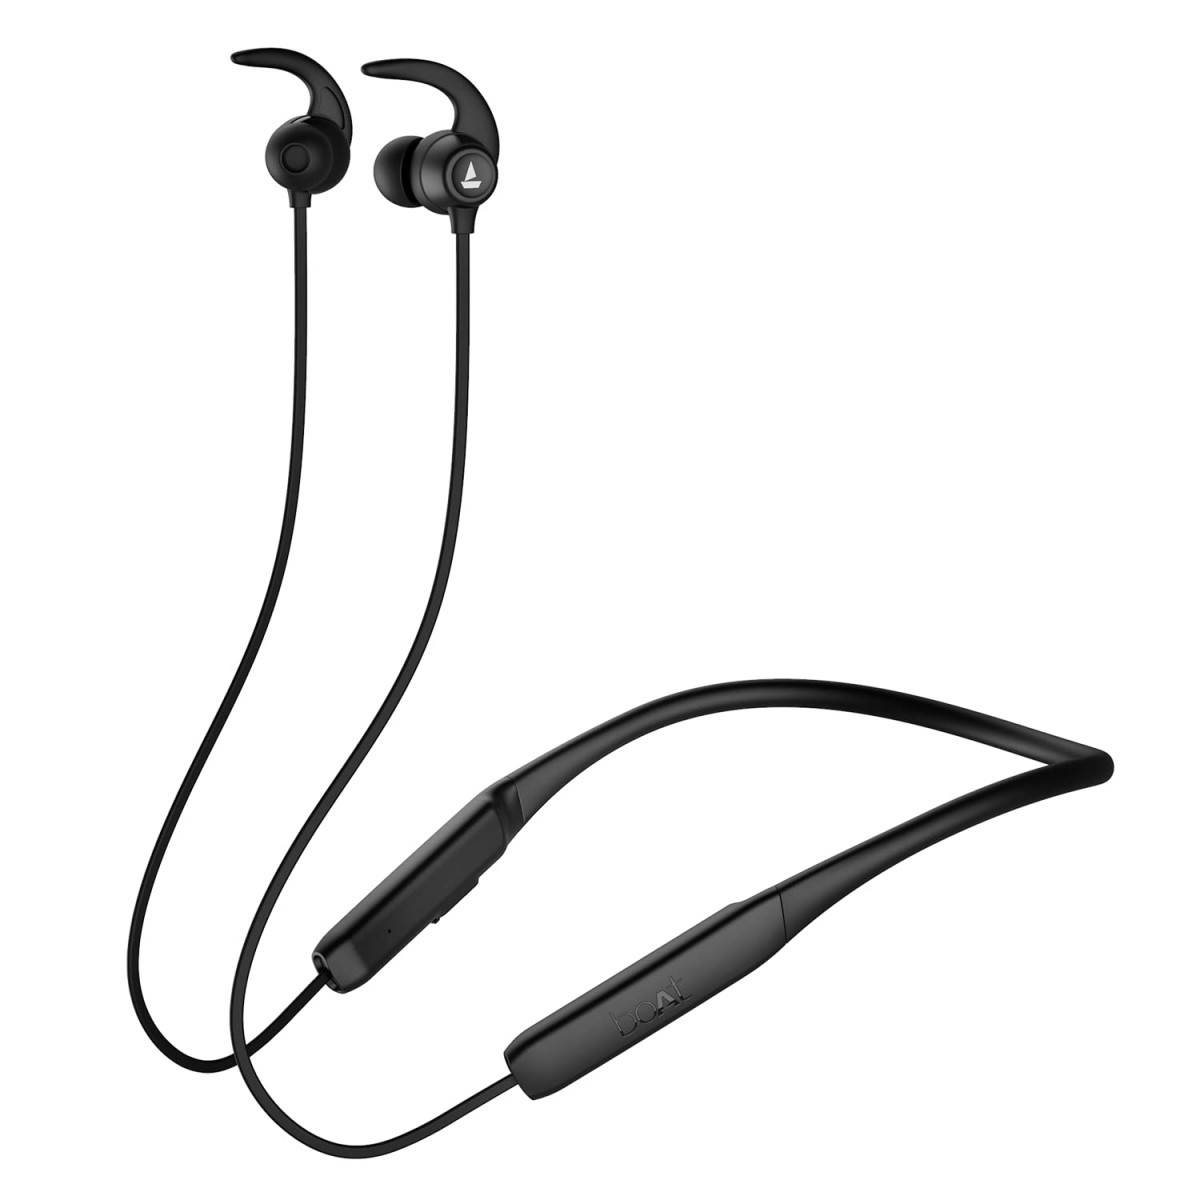 boAt Rockerz 255 Neo in-Ear Bluetooth Neckband with Mic with ENx Tech Smart Magnetic Buds ASAP Charge Upto 25 Hours Playback 12MM Drivers Beast Mode Dual Pairing Active Black